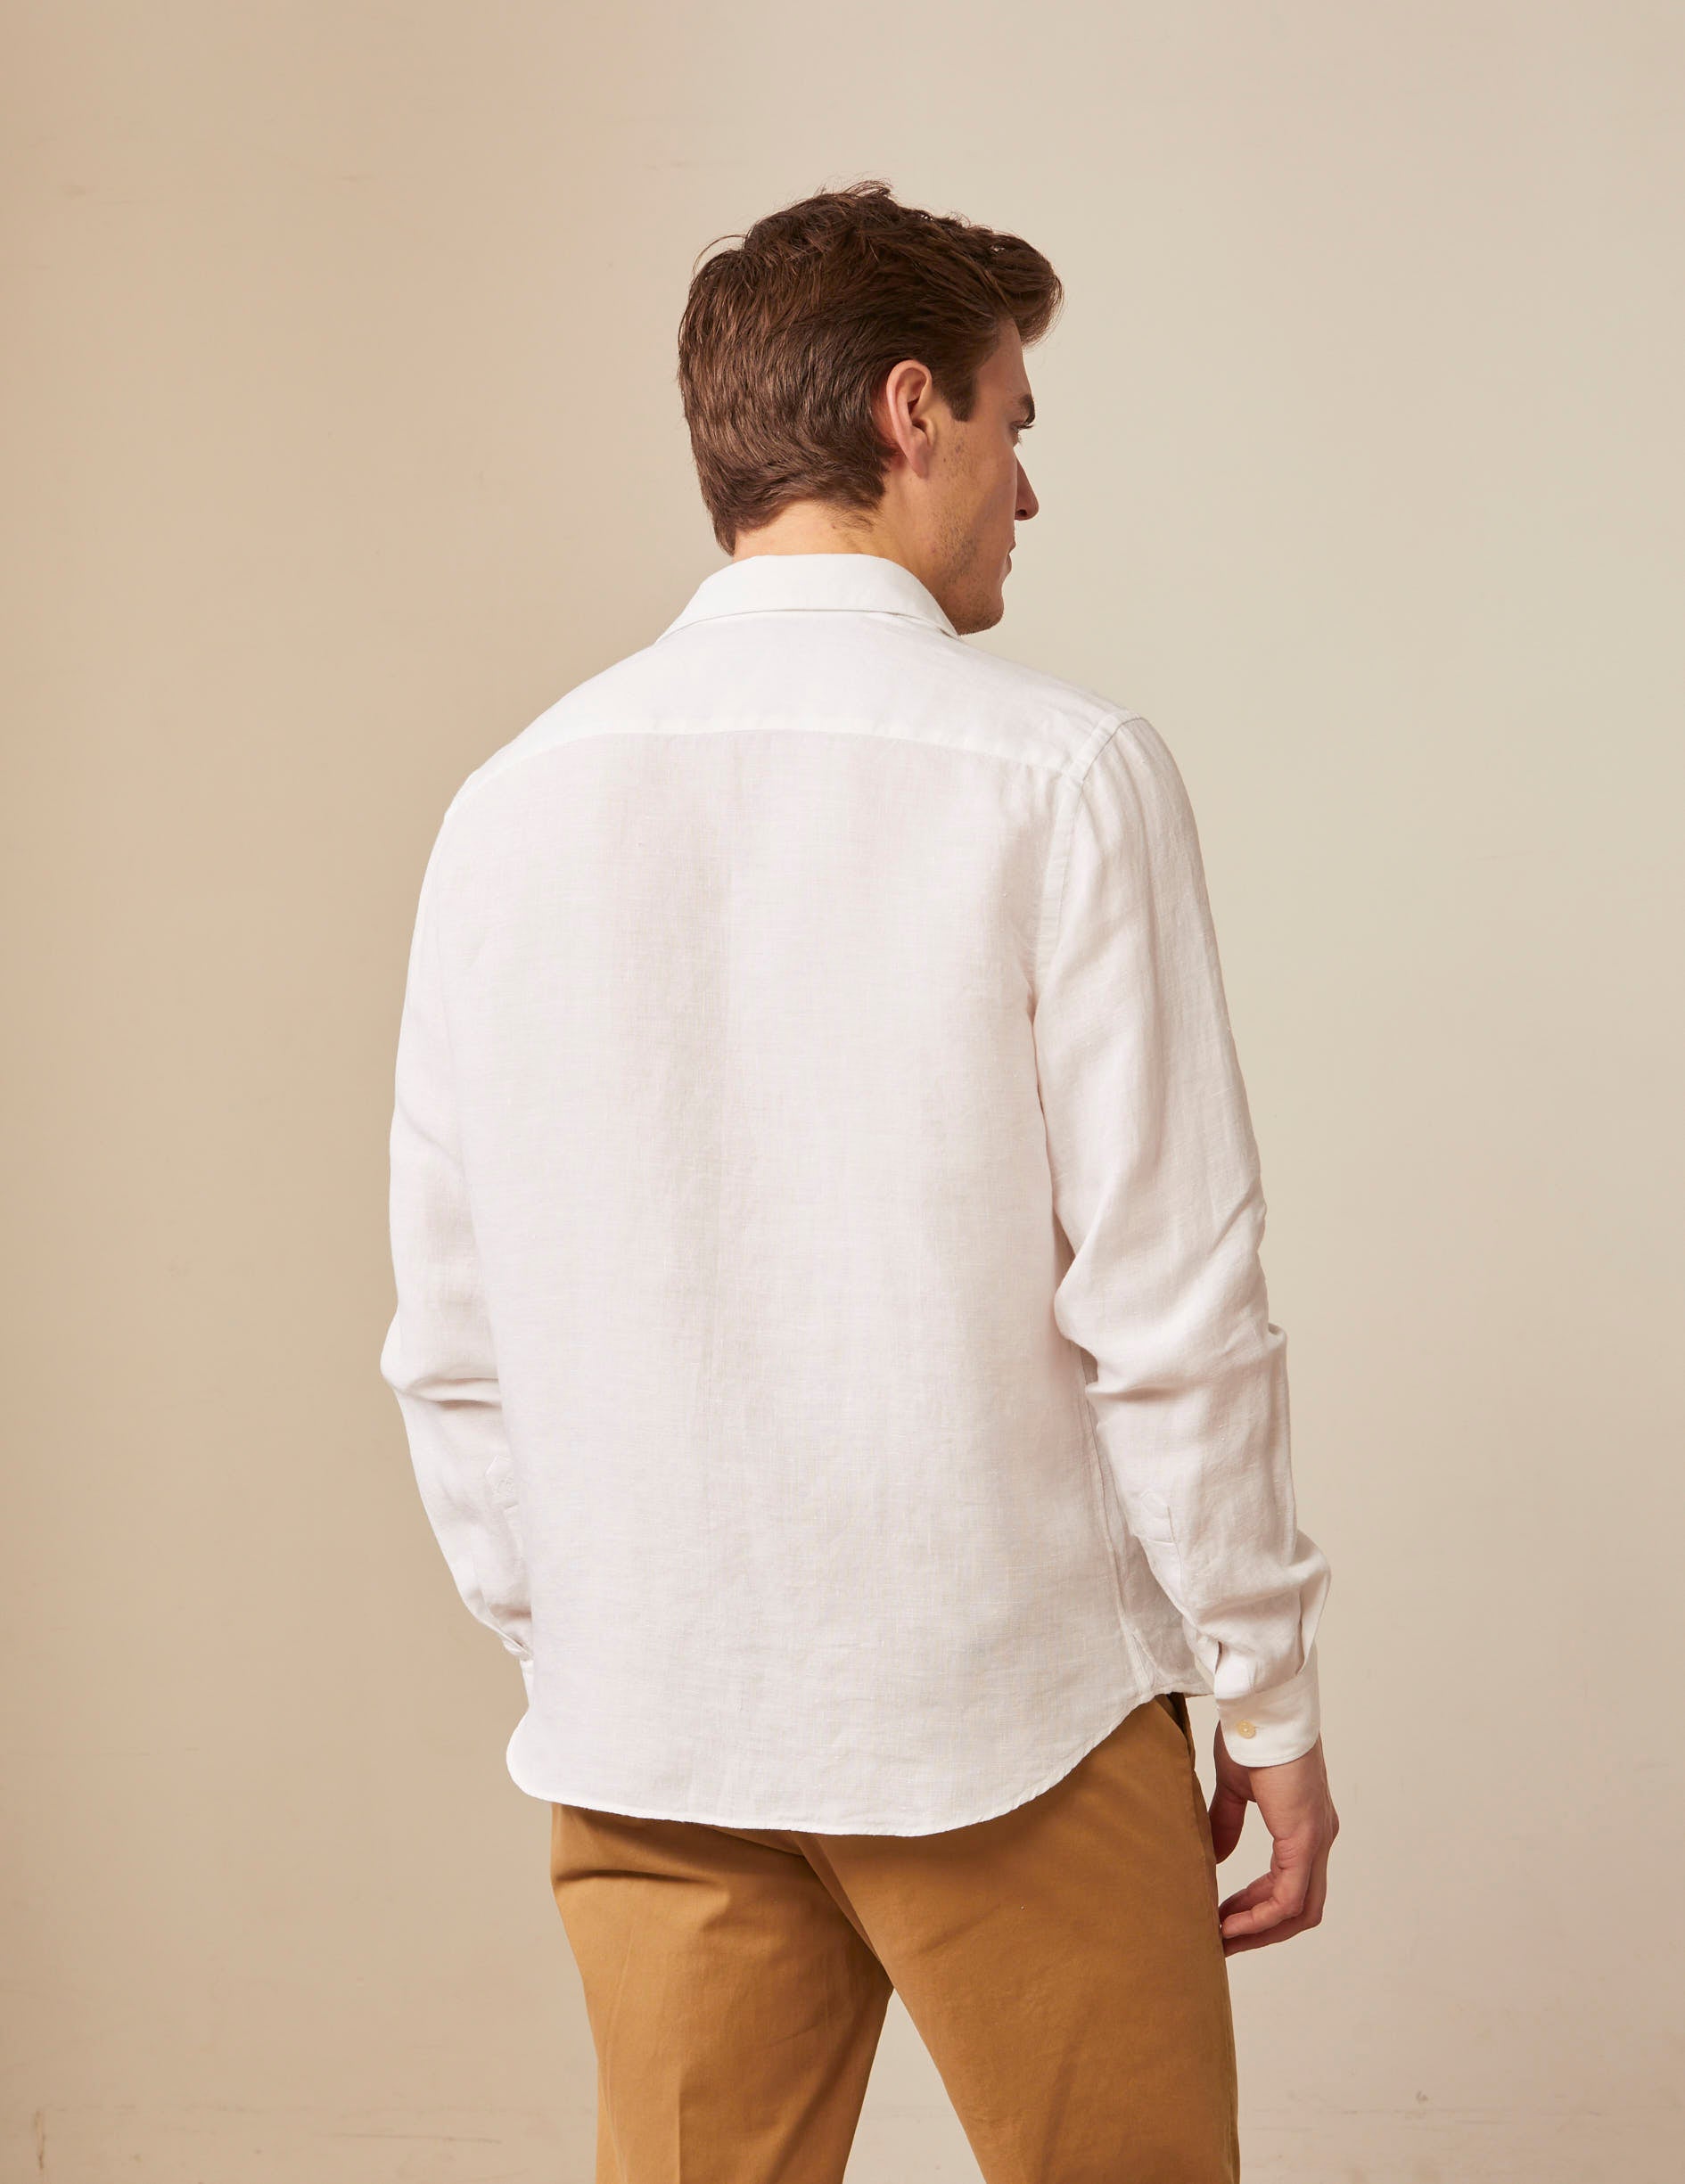 White linen "Je t'aime" shirt with grey embroidery - Linen - Figaret Collar